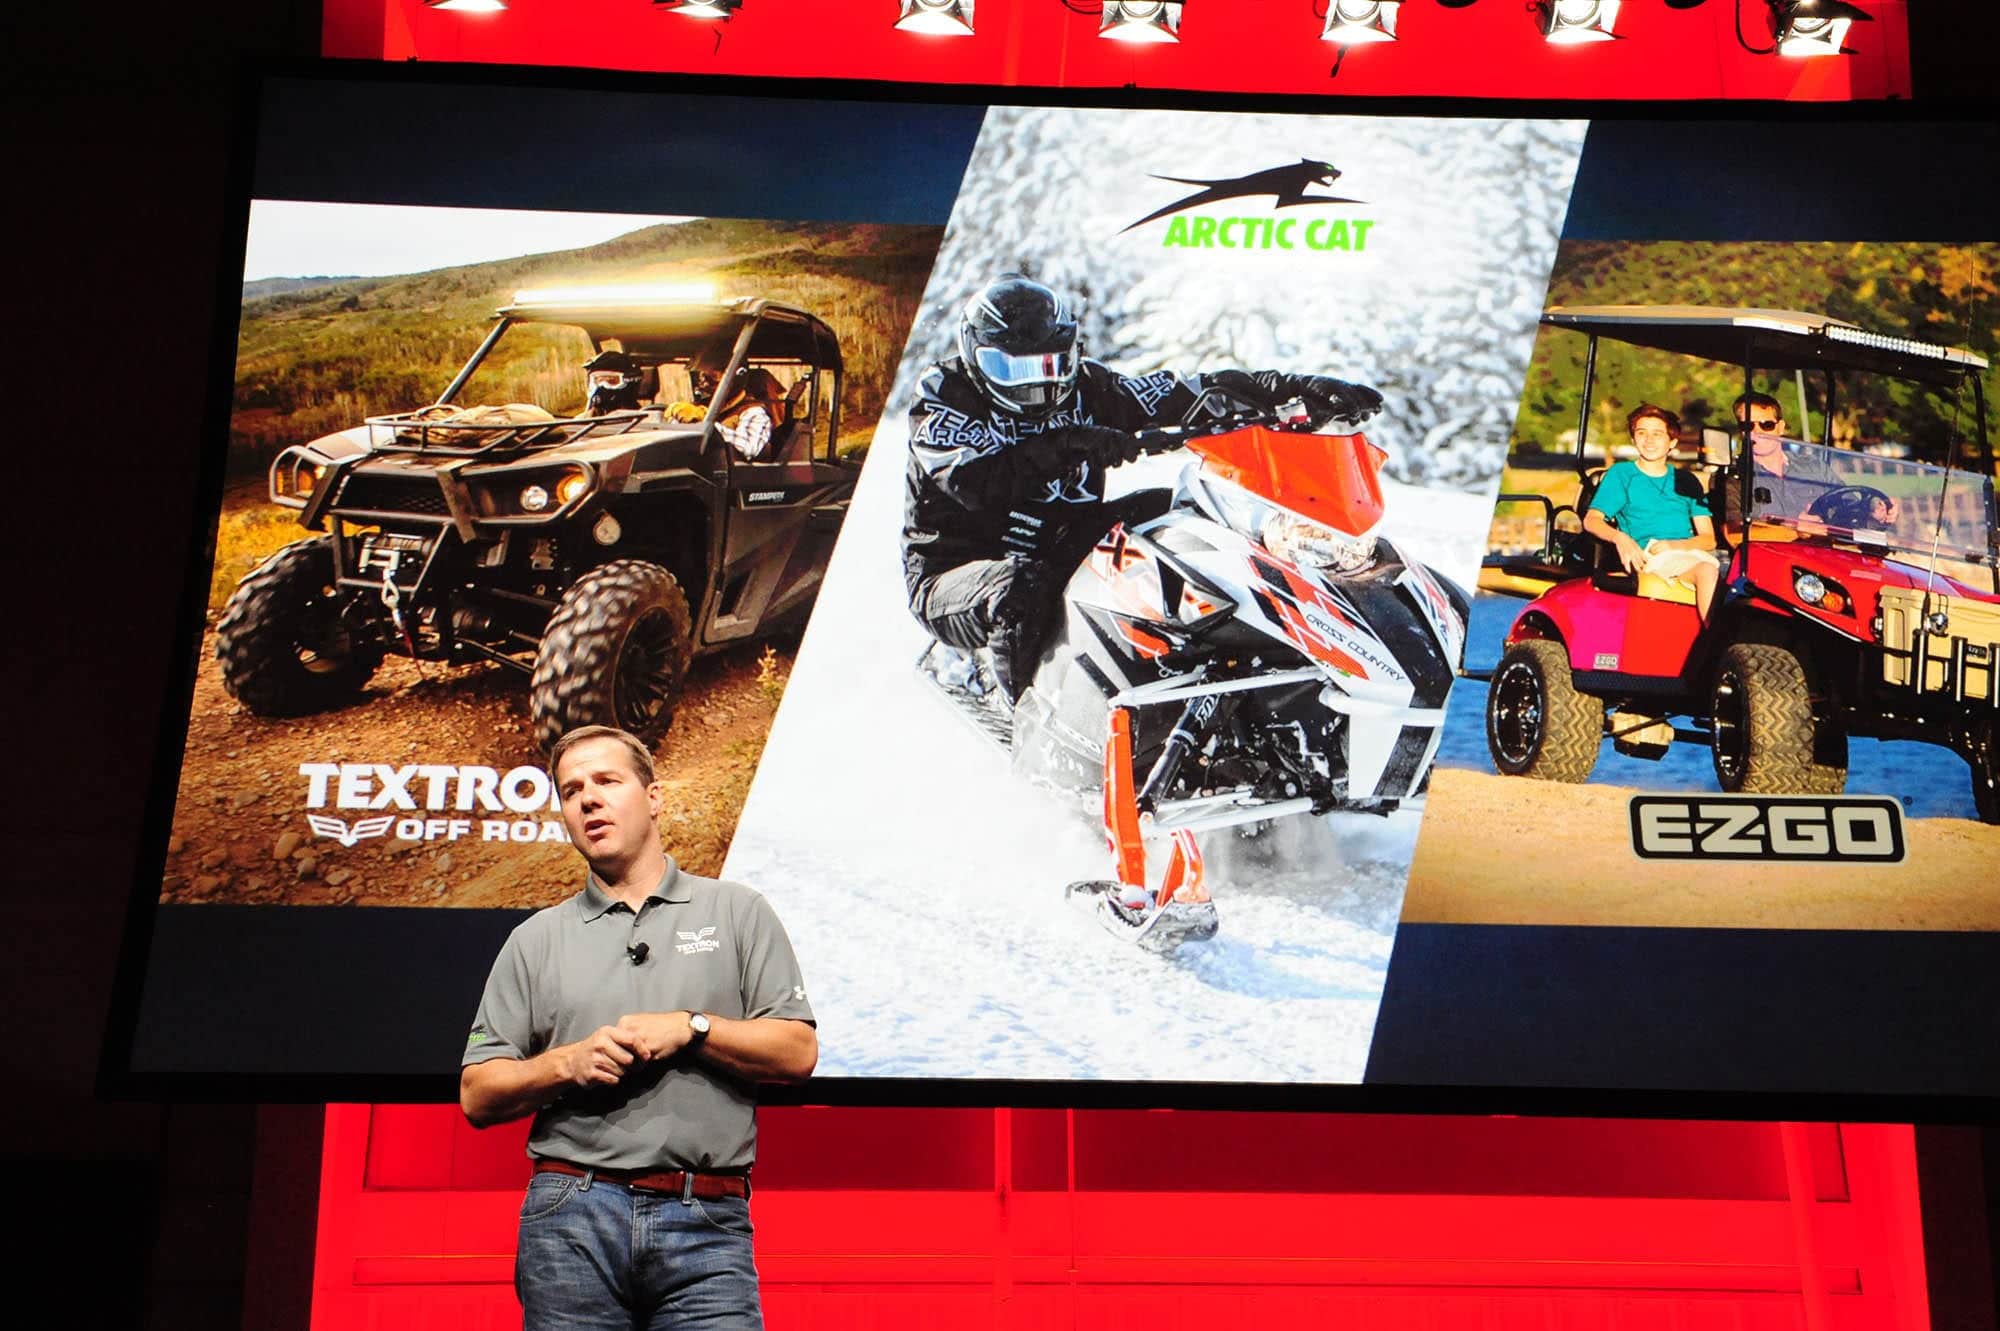 Arctic Cat brand name changed to Textron Off Road